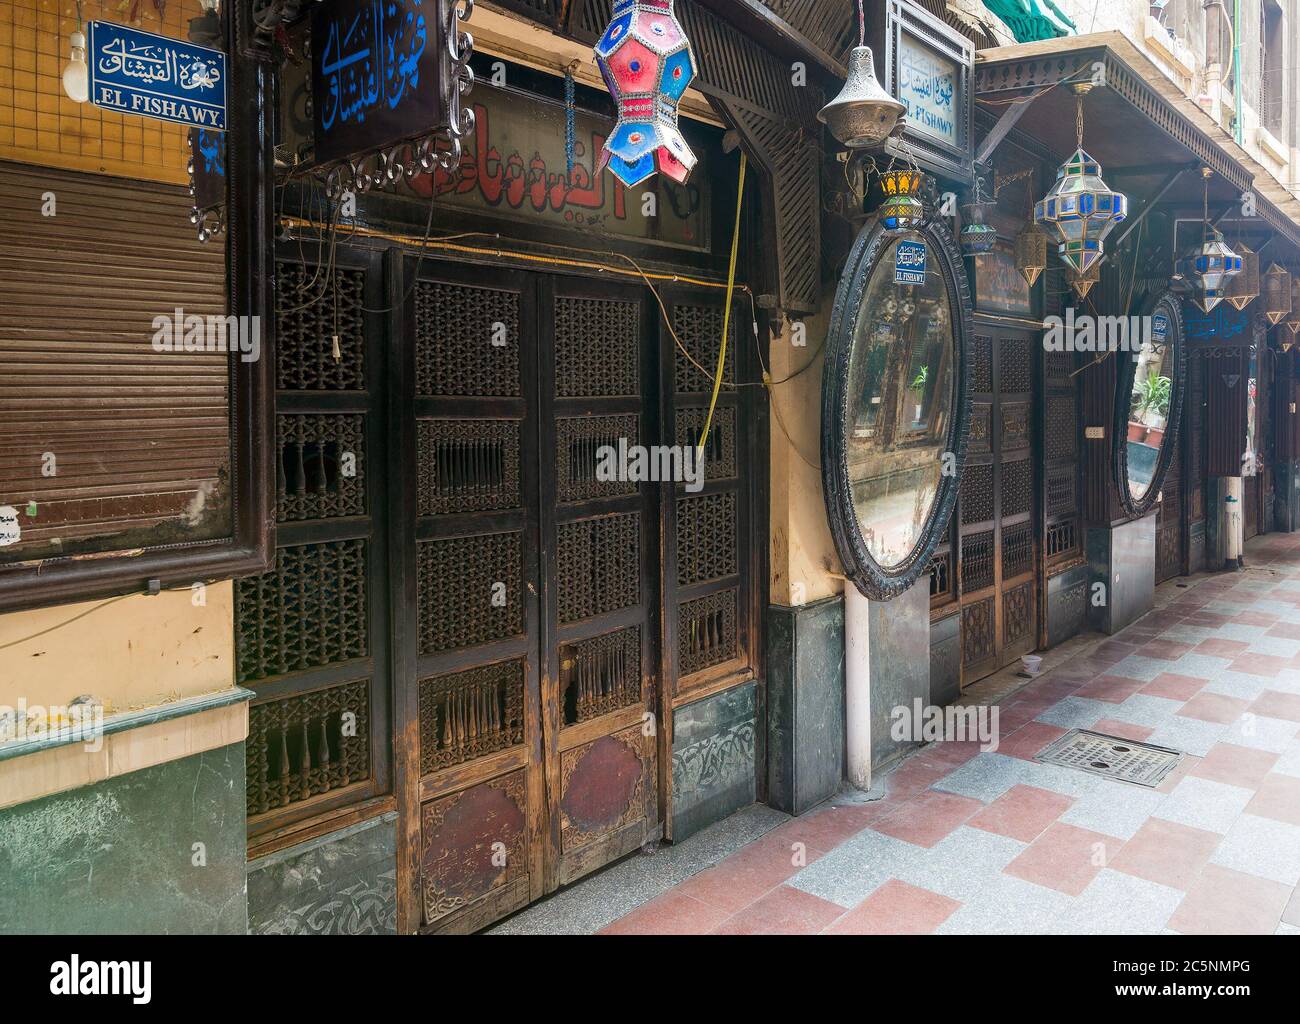 Cairo, Egypt- June 26 2020: Old famous coffeehouse, El Fishawi, located in historic Mamluk era Khan al-Khalili famous bazaar and souq, closed during Covid-19 lockdown for the first time since 1773 Stock Photo